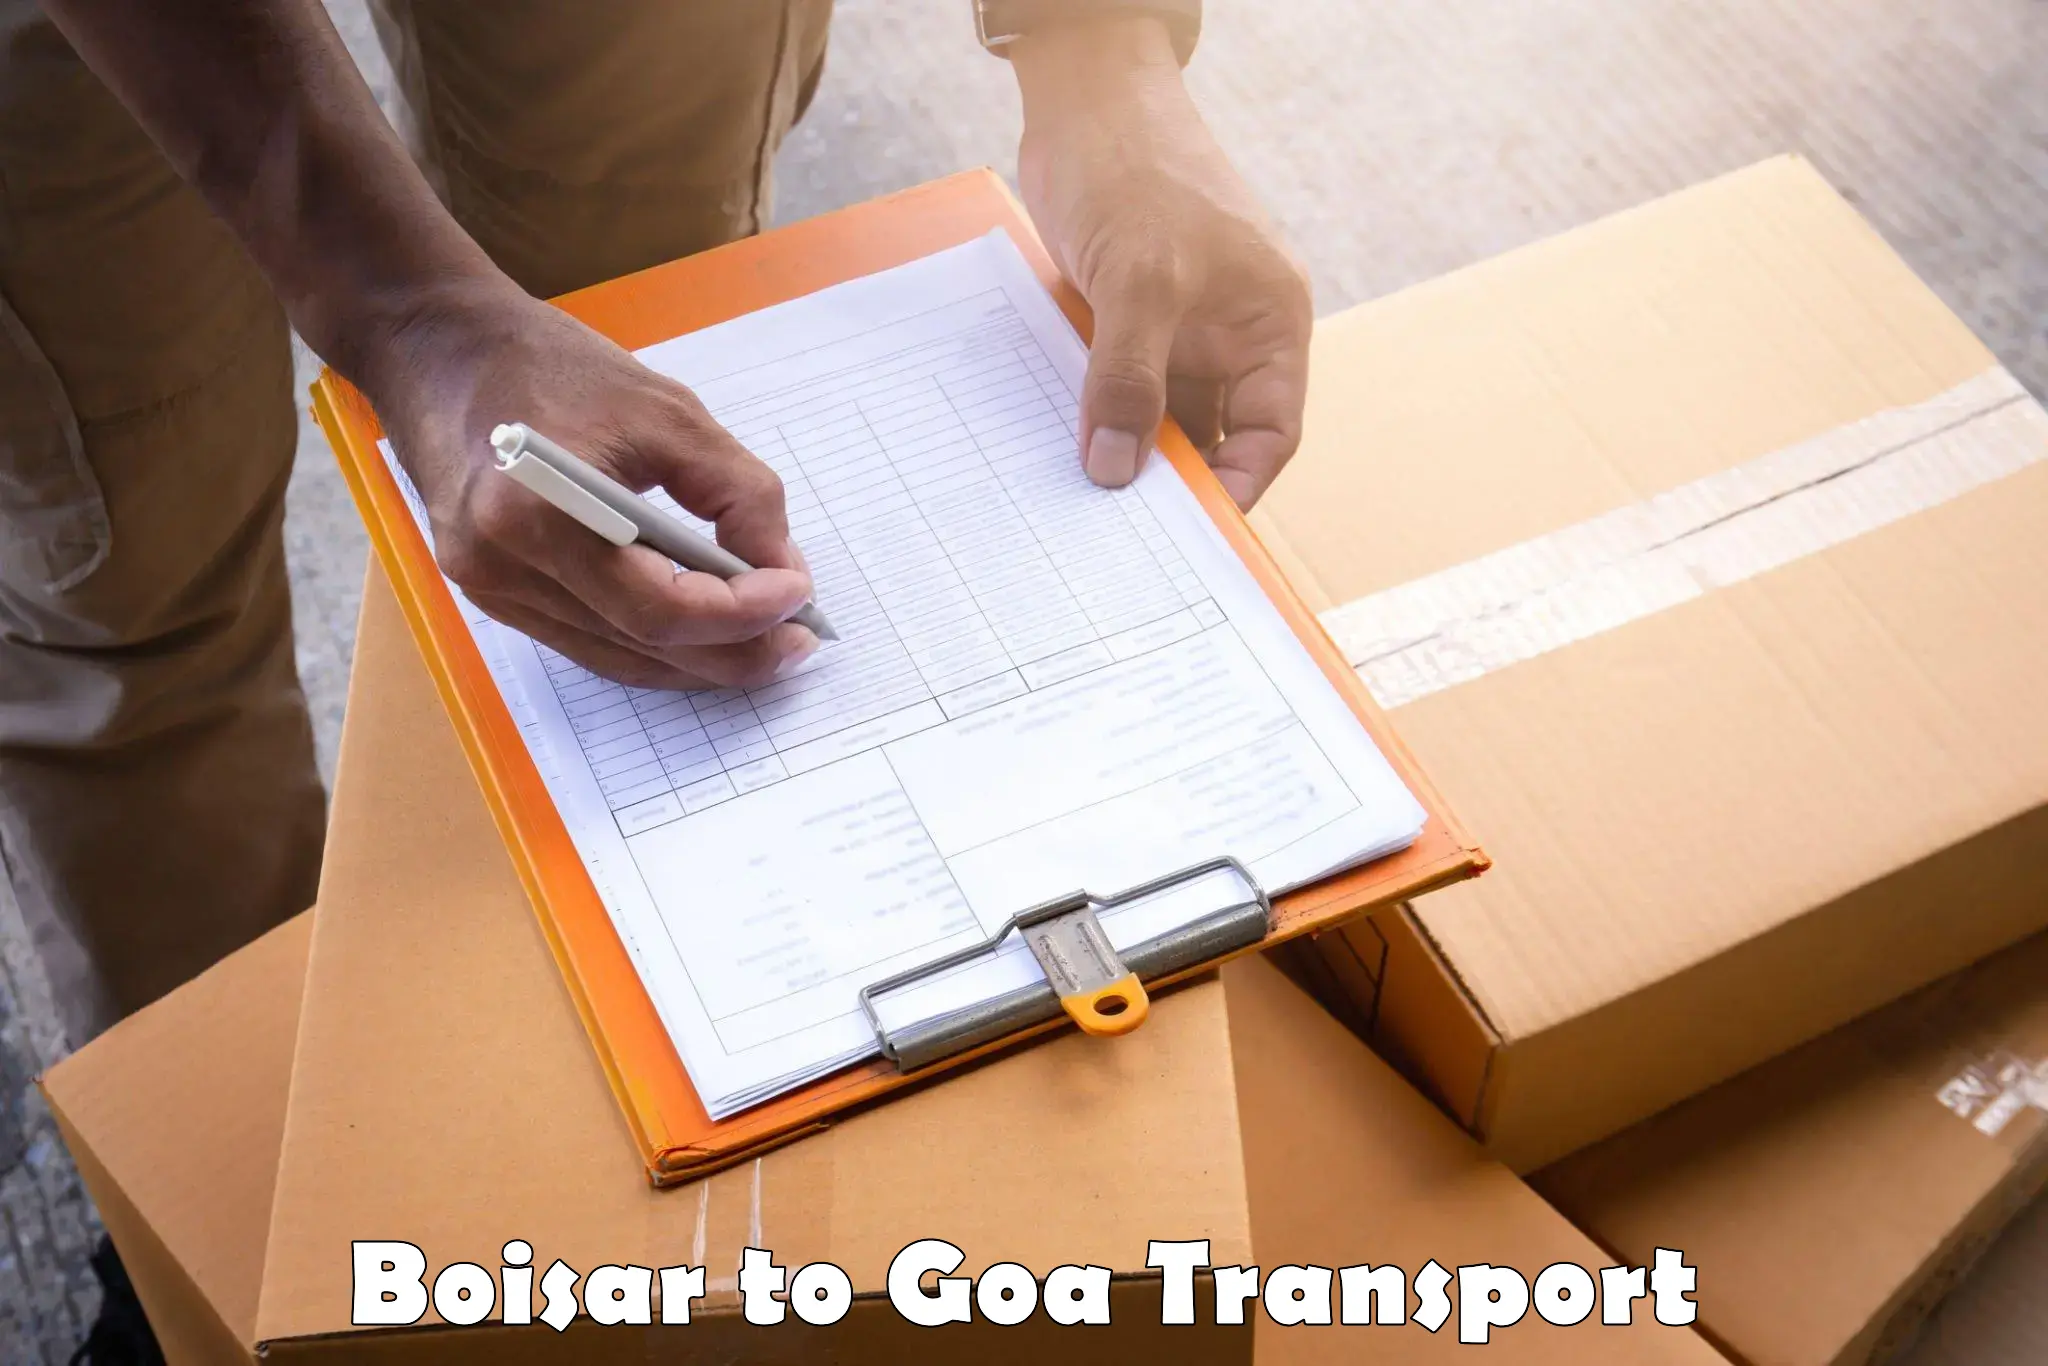 Transport bike from one state to another Boisar to Goa University